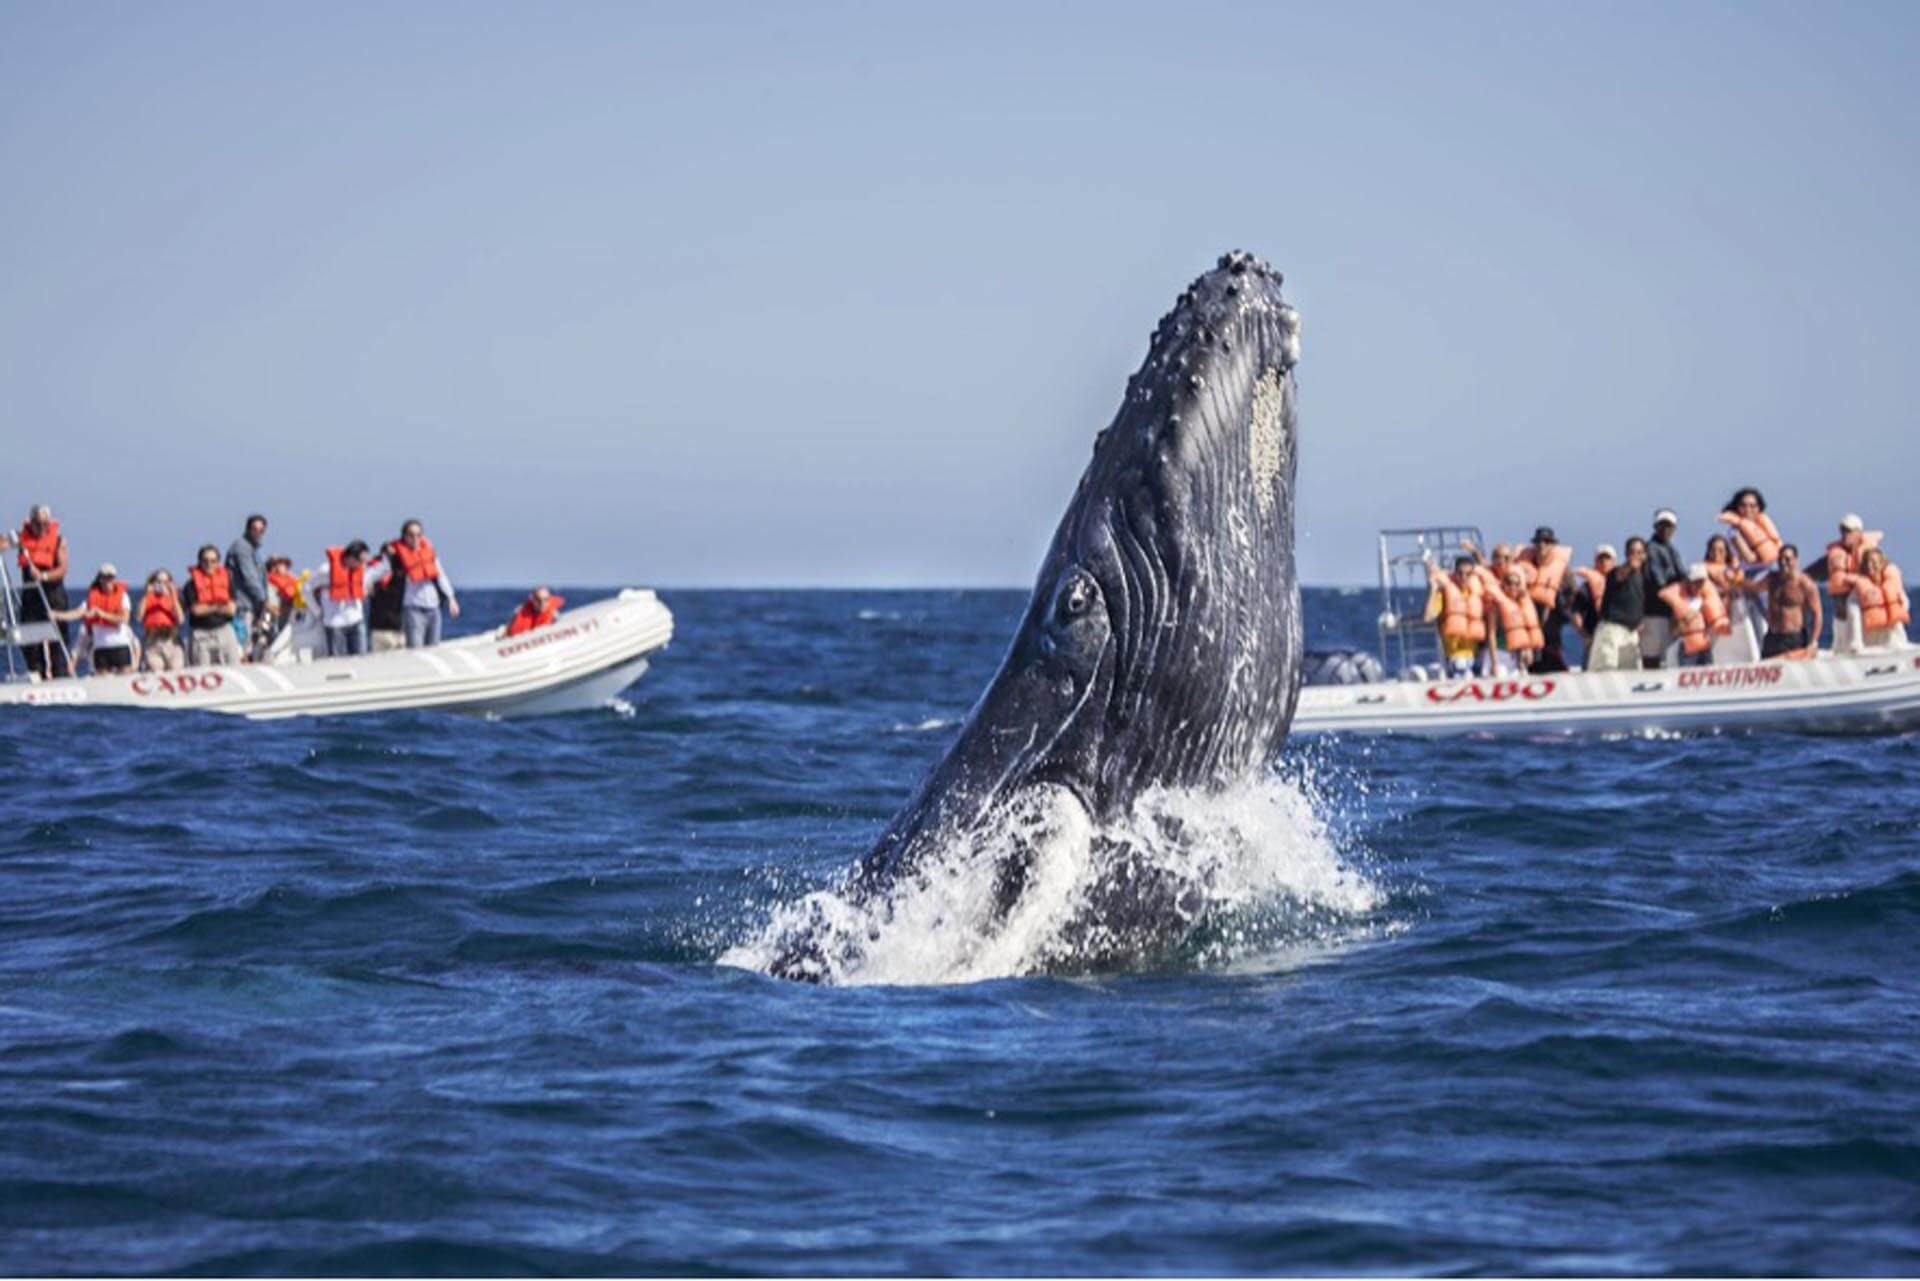 Cabo Whale watching